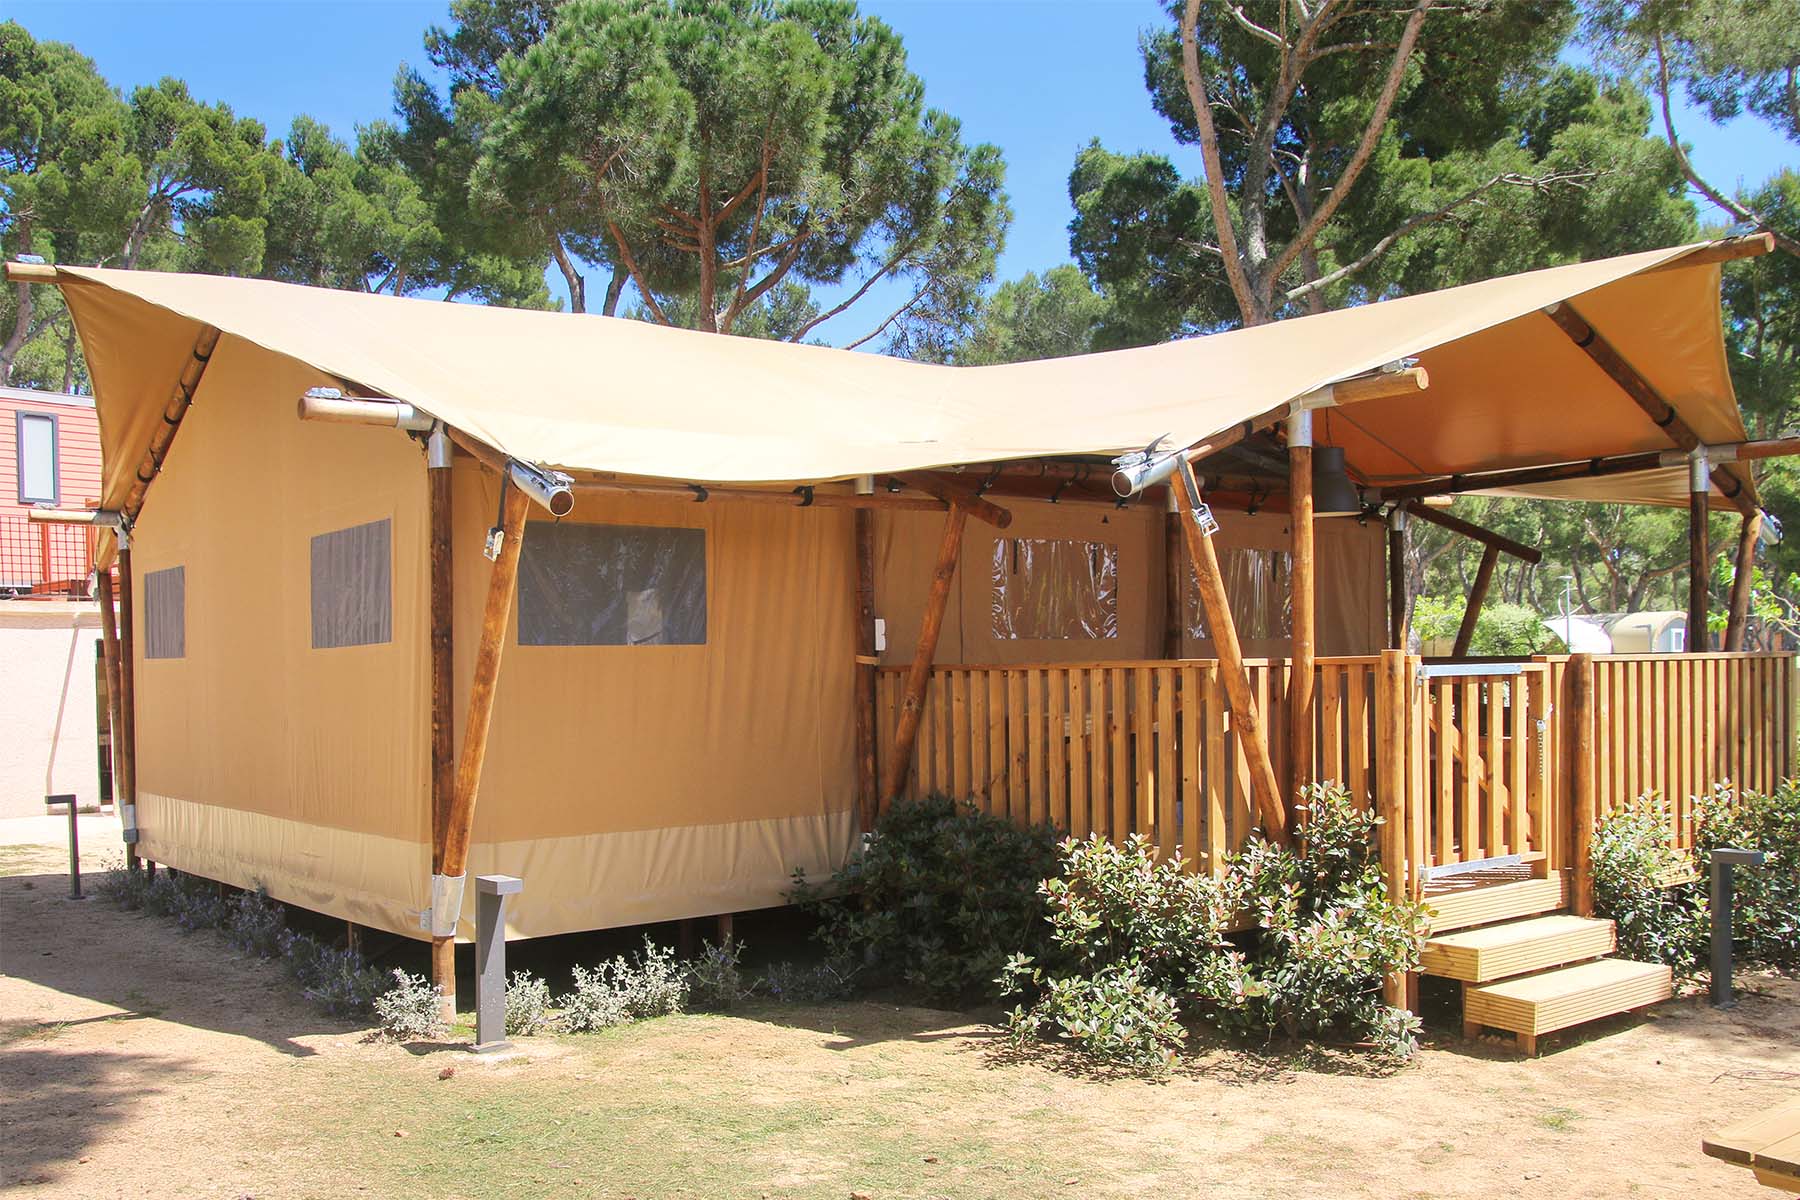 Andrew Halliday Turbulentie inzet Glamping tent kopen? - Campsolutions #1 in Glamping